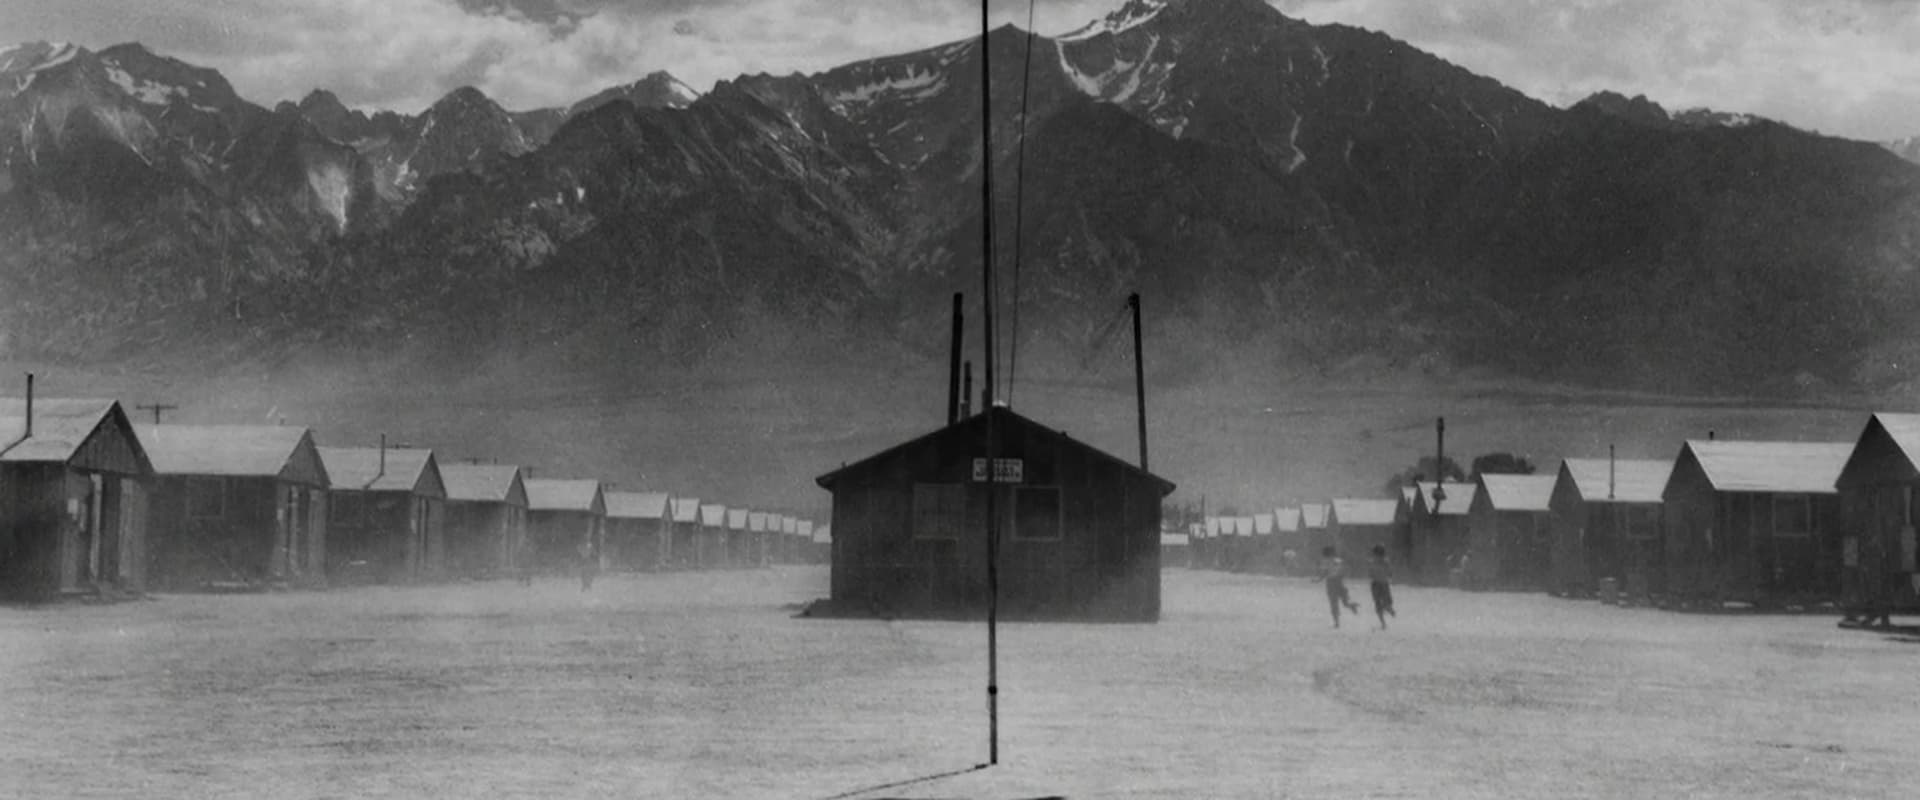 Betrayed: Surviving an American Concentration Camp